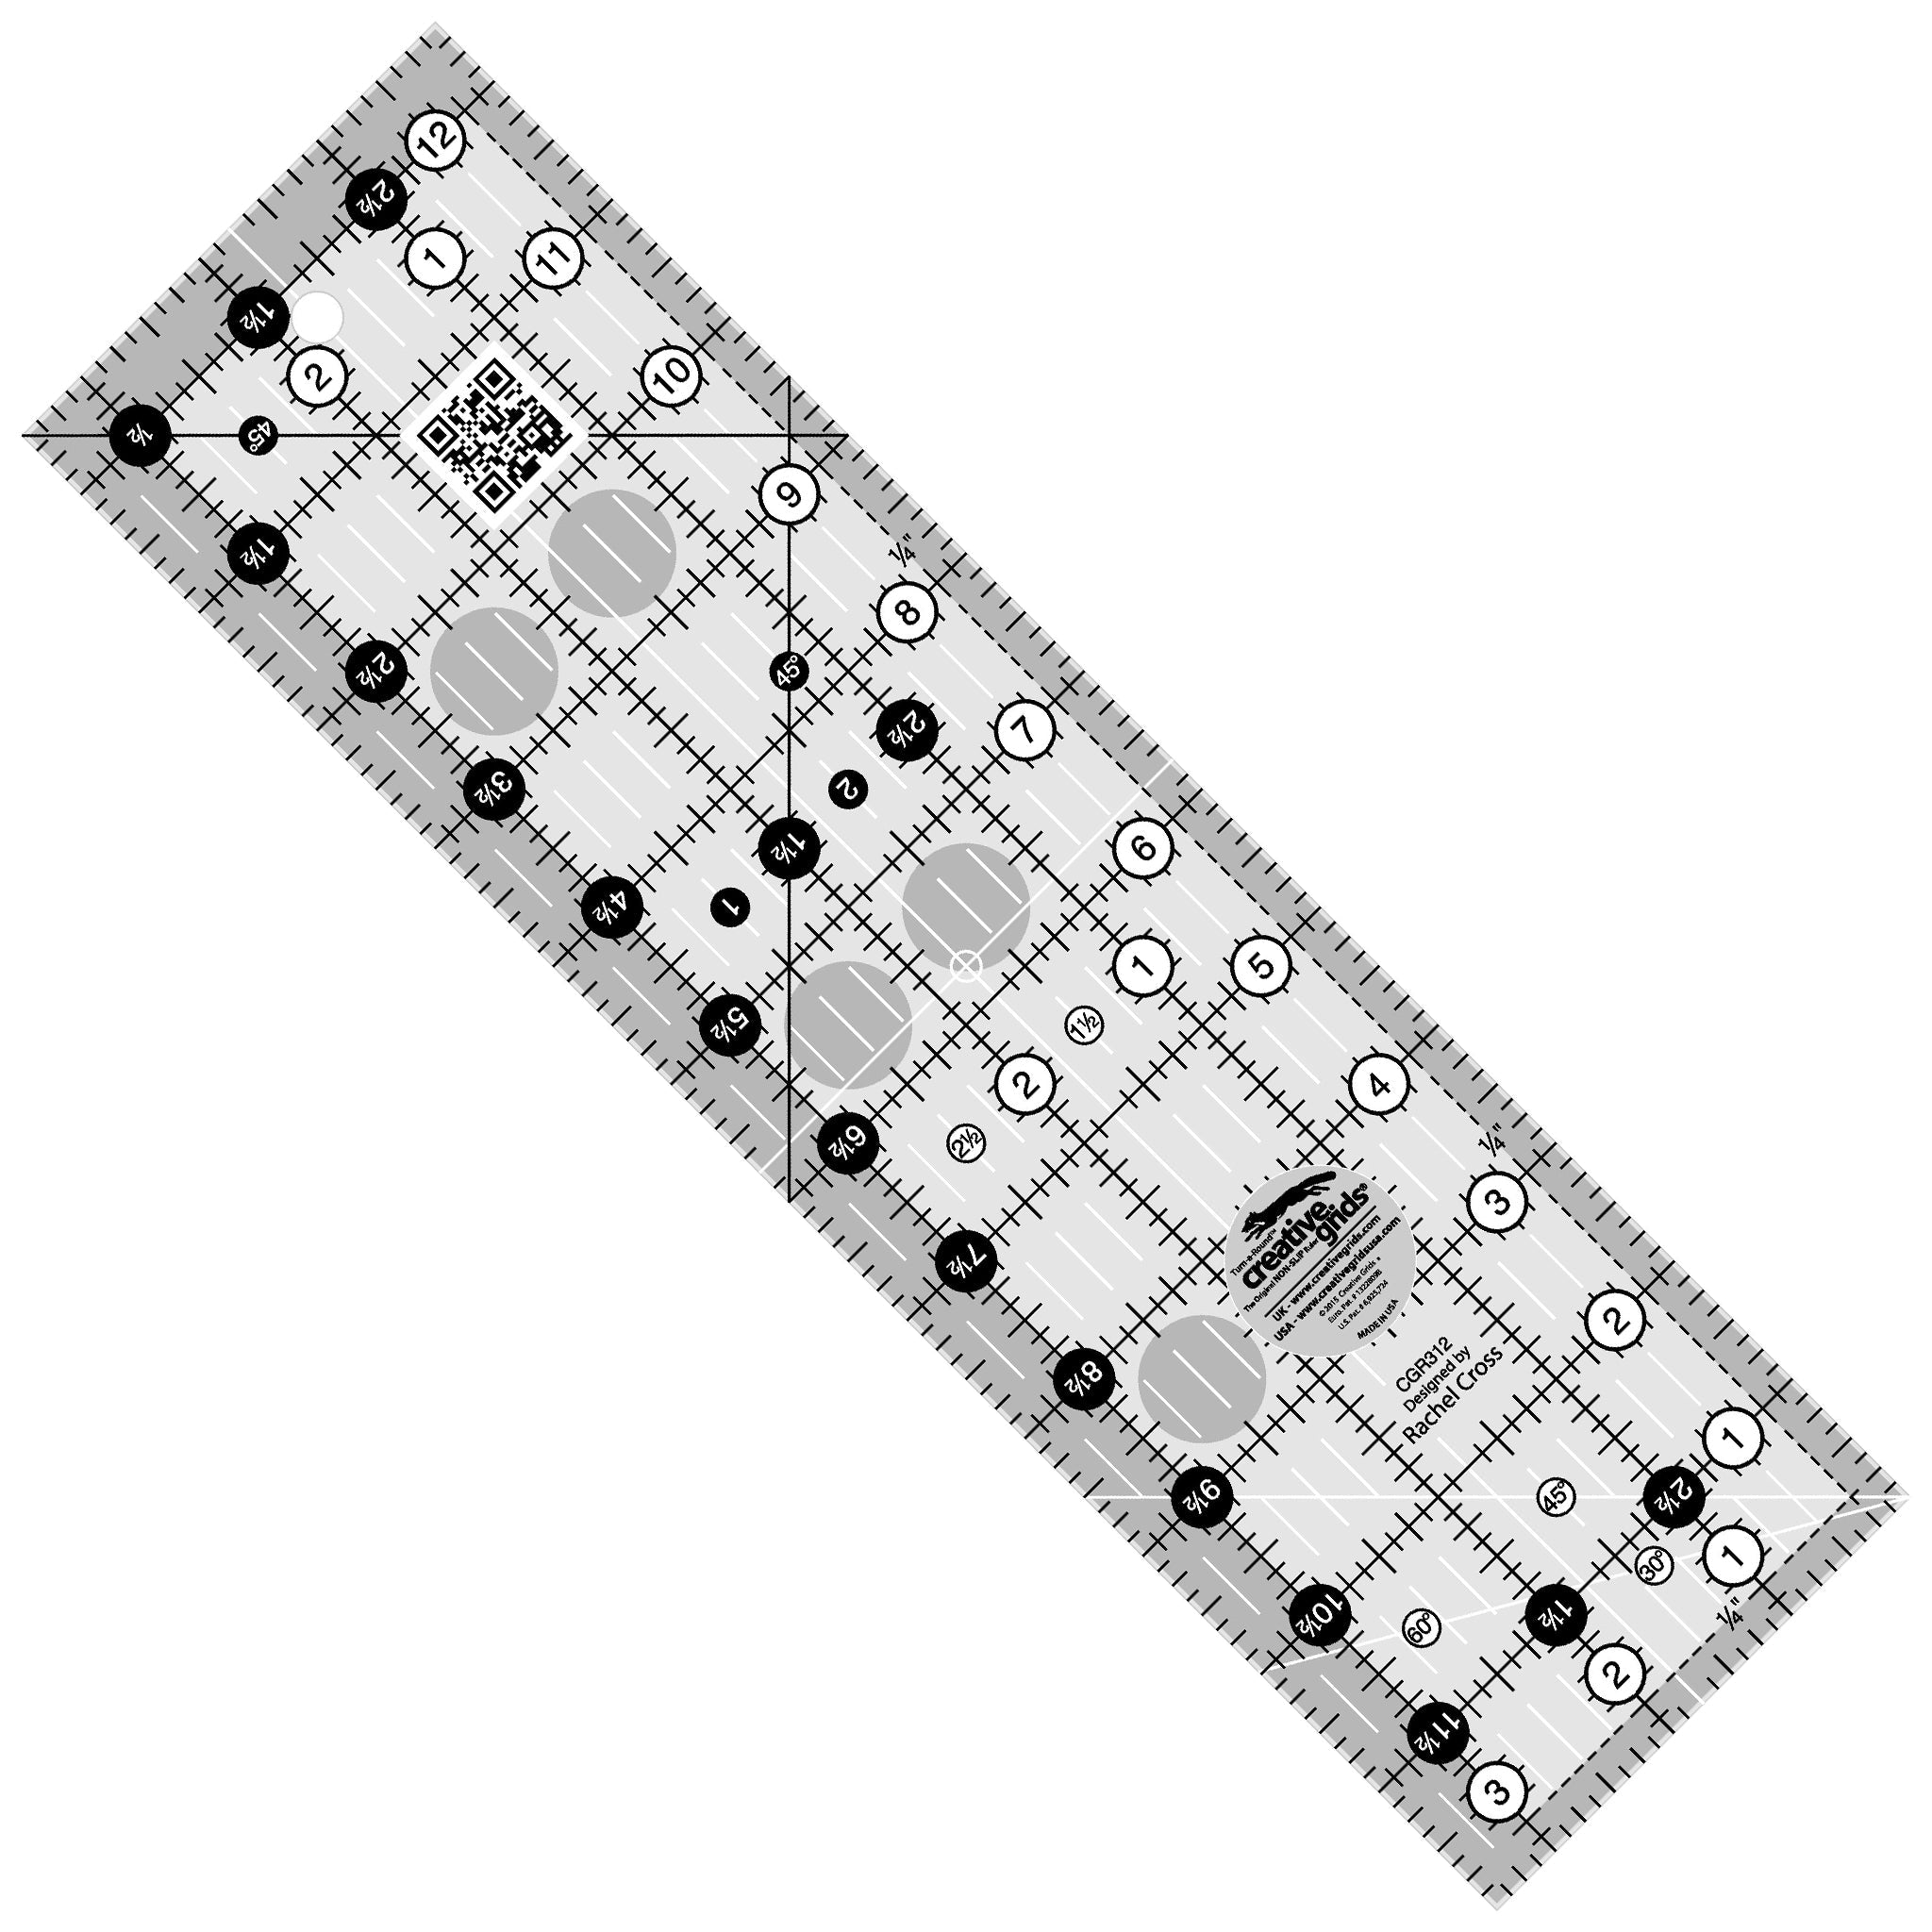 Creative Grids® Quilt Ruler 16 1/2 x 16 1/2 Square - for Creative Grids